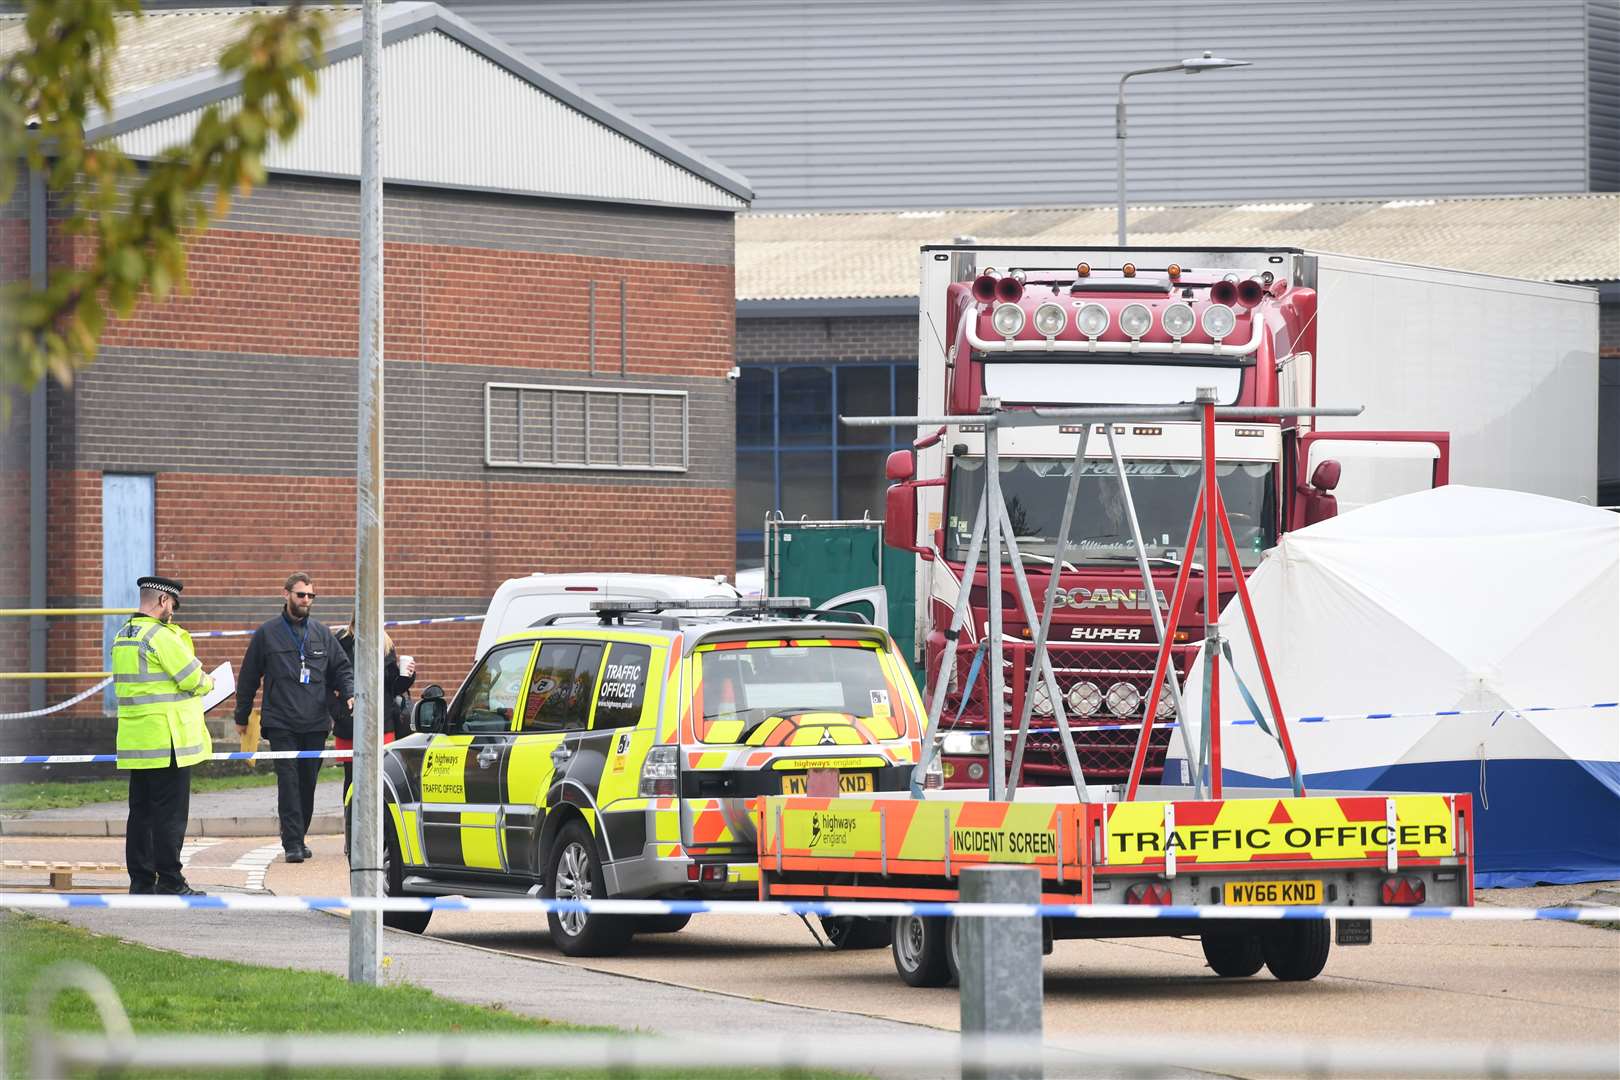 The bodies of 39 migrants were found in the back of a truck in Grays, Essex. Photo: Stefan Rousseau/PA Wire